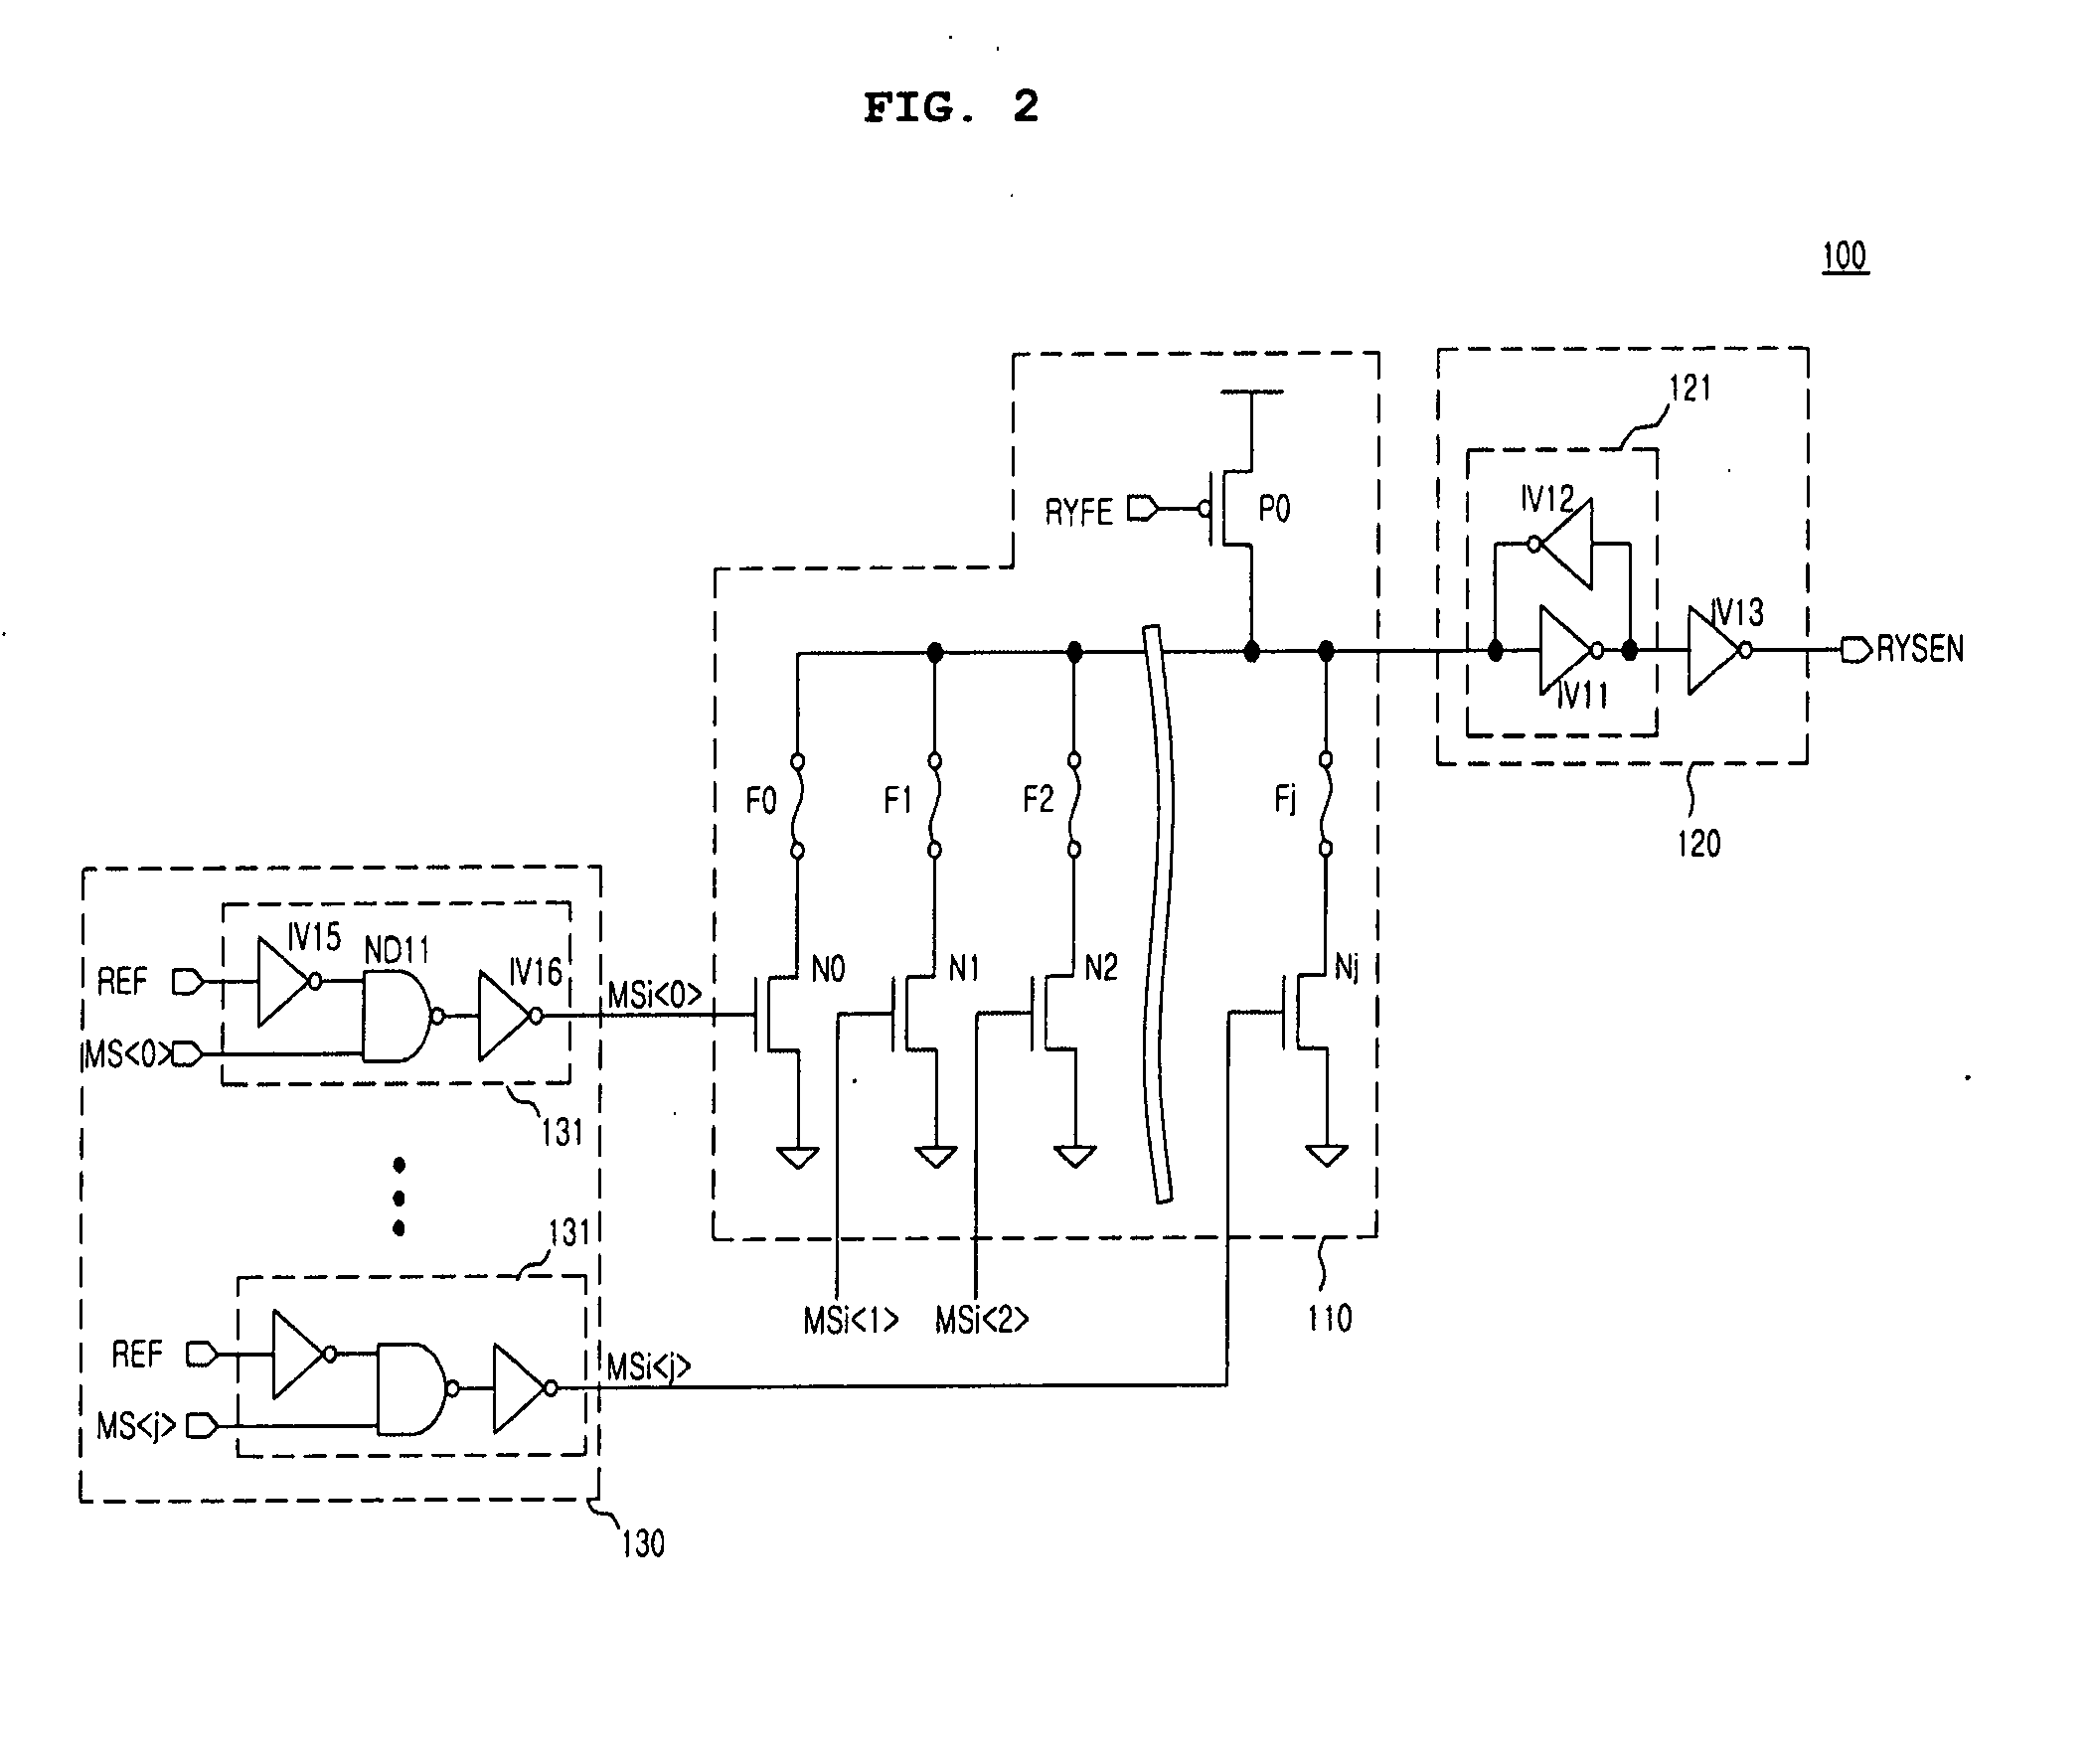 Semiconductor memory apparatus and method of controlling redundancy thereof